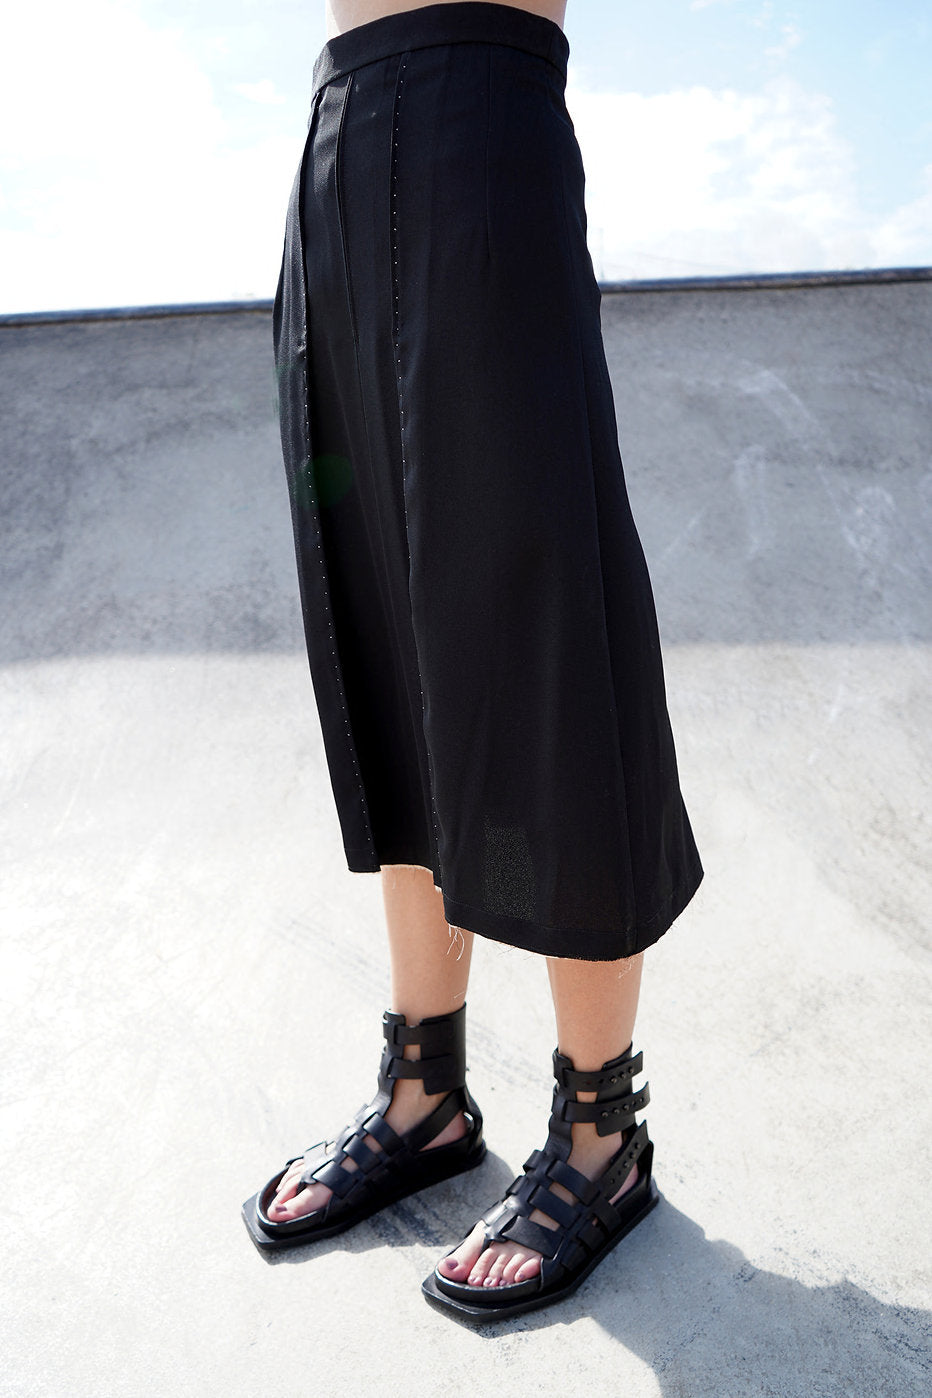 Side profile of the Amelia Midi Skirt, showing the metal zip and pleated fabric.